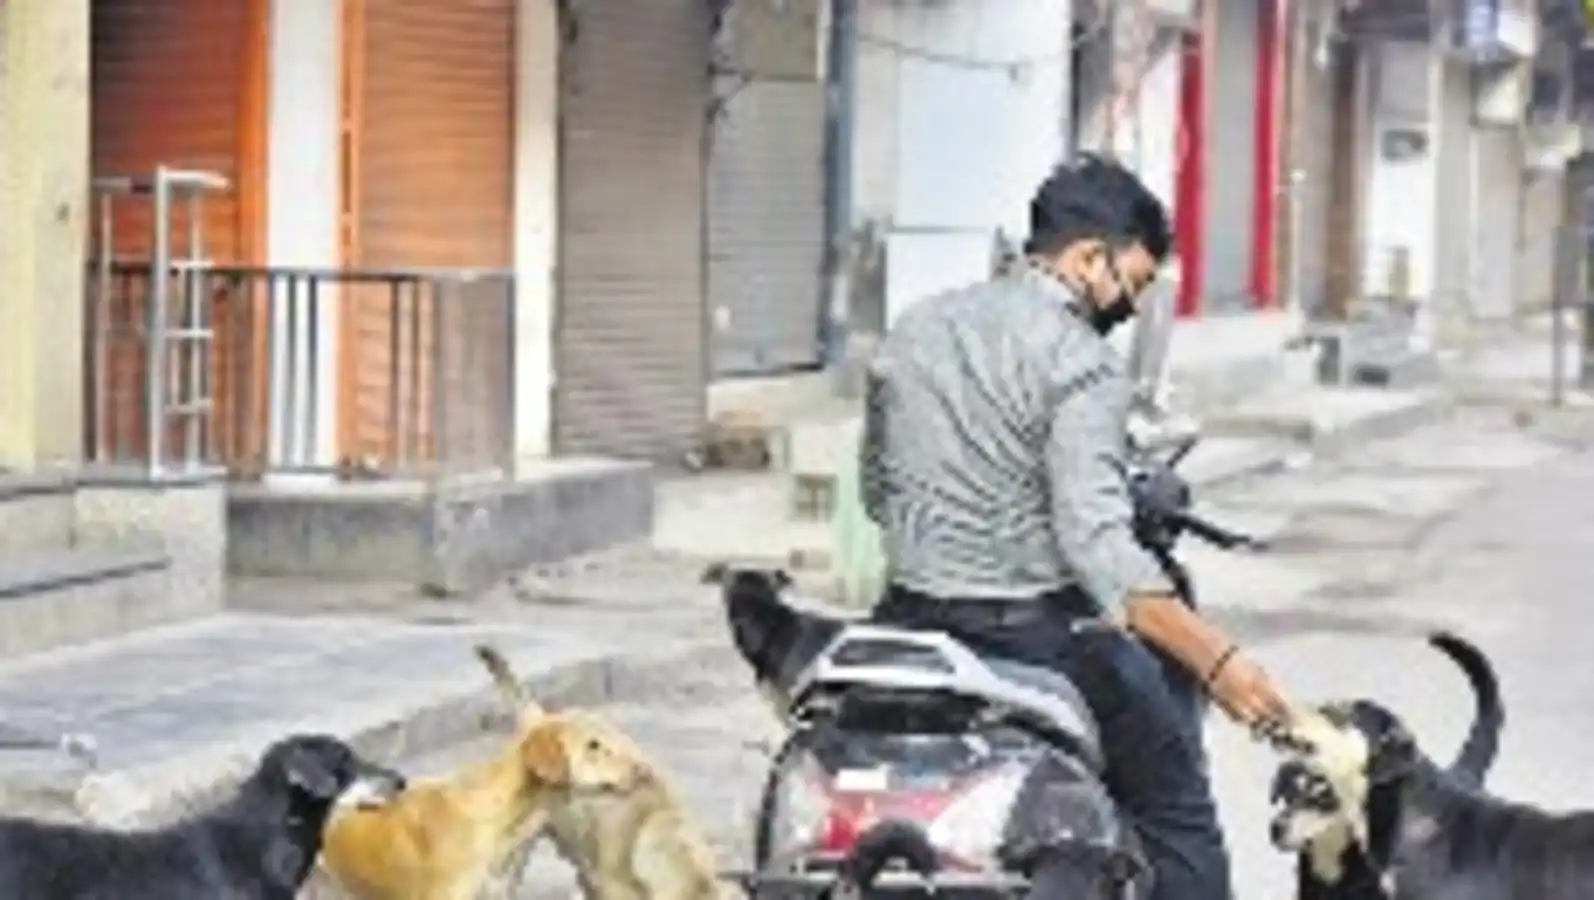 Top court stays order on feeding community dogs